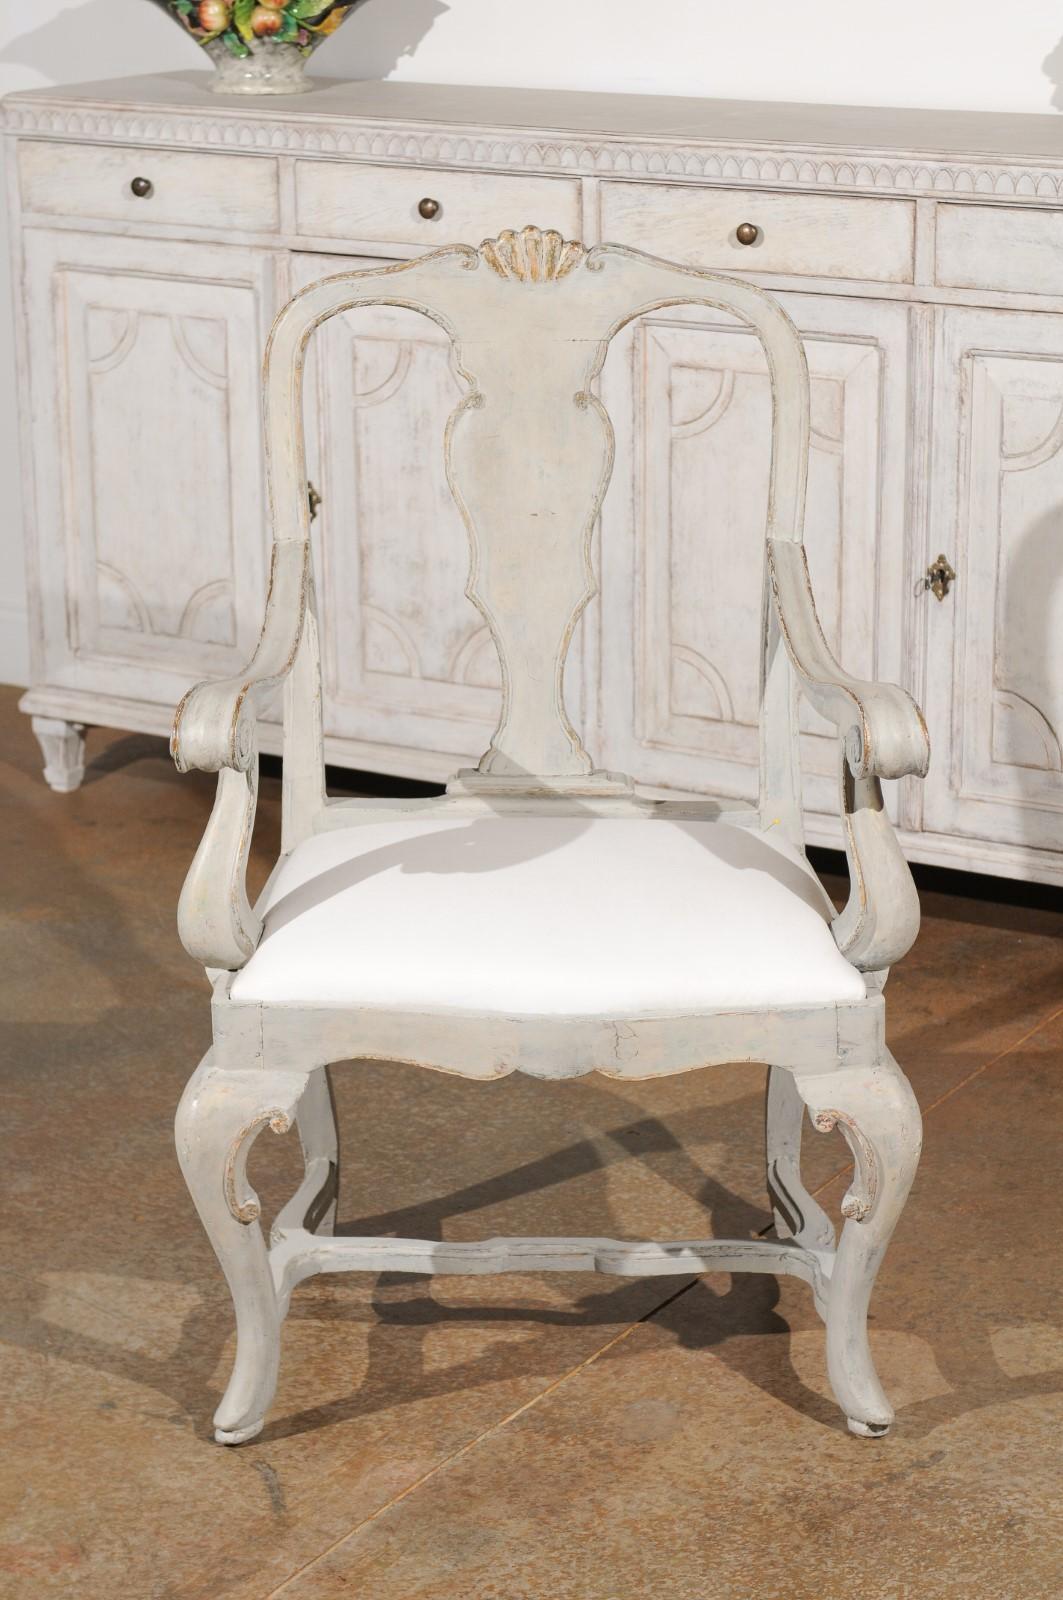 An Italian painted wood Rococo style armchair from the early 19th century, with carved splat, scrolling arms, cabriole legs and cross stretcher. Born in Venice during the early years of the 19th century, this exquisite painted armchair features a